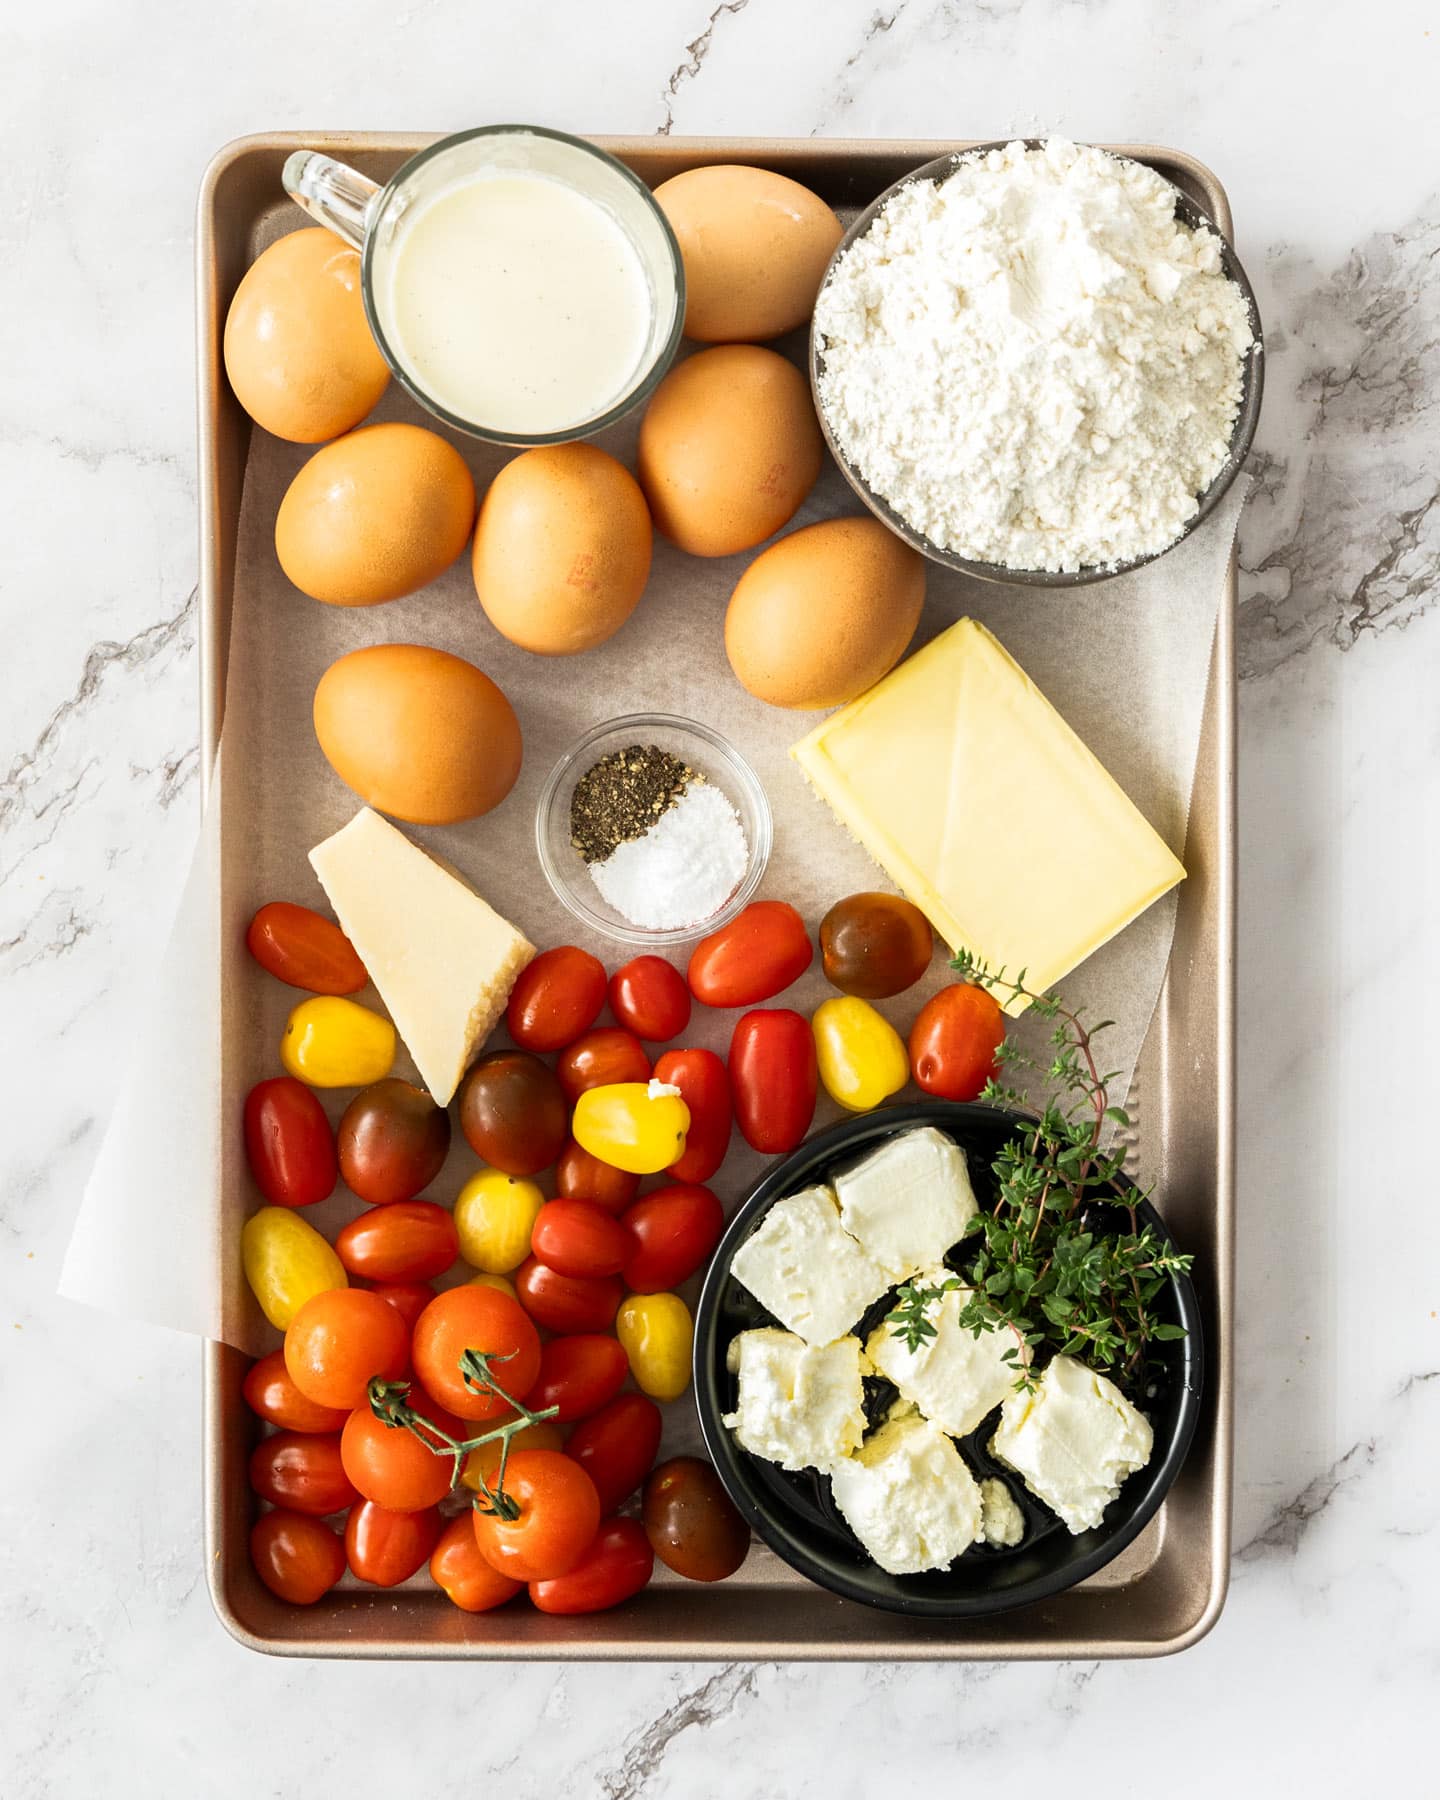 Ingredients for cheese and tomato quiche on a baking tray.